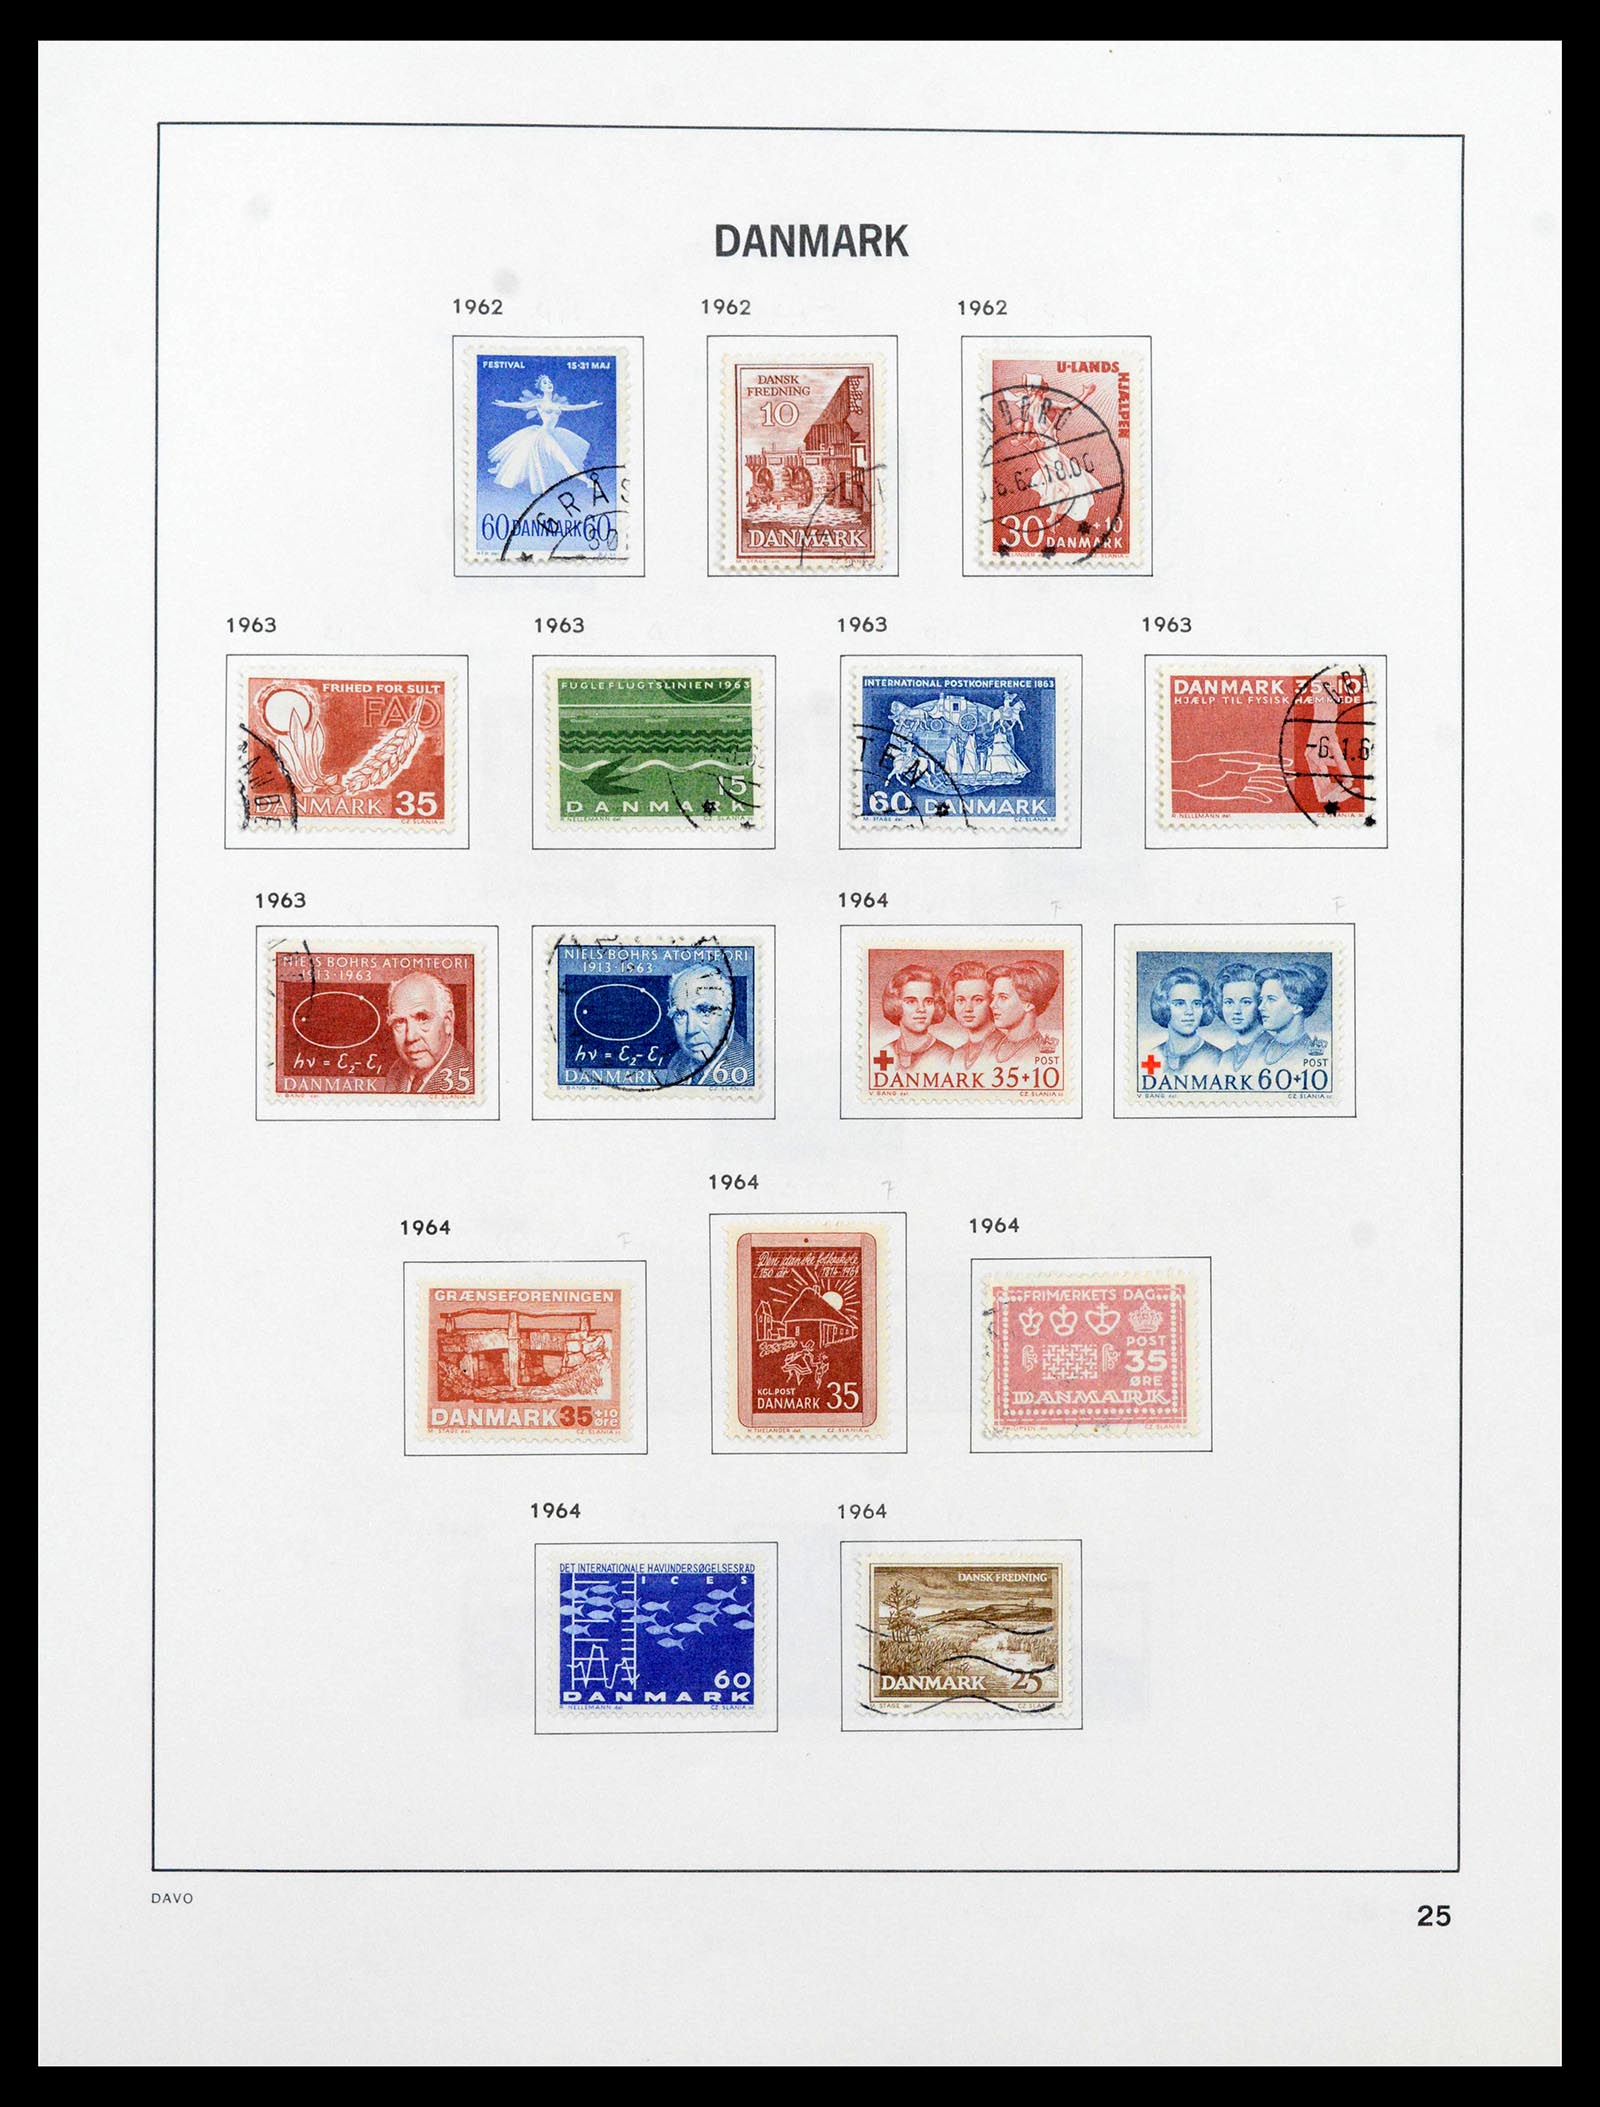 39428 0027 - Stamp collection 39428 Denmark 1851-2019.